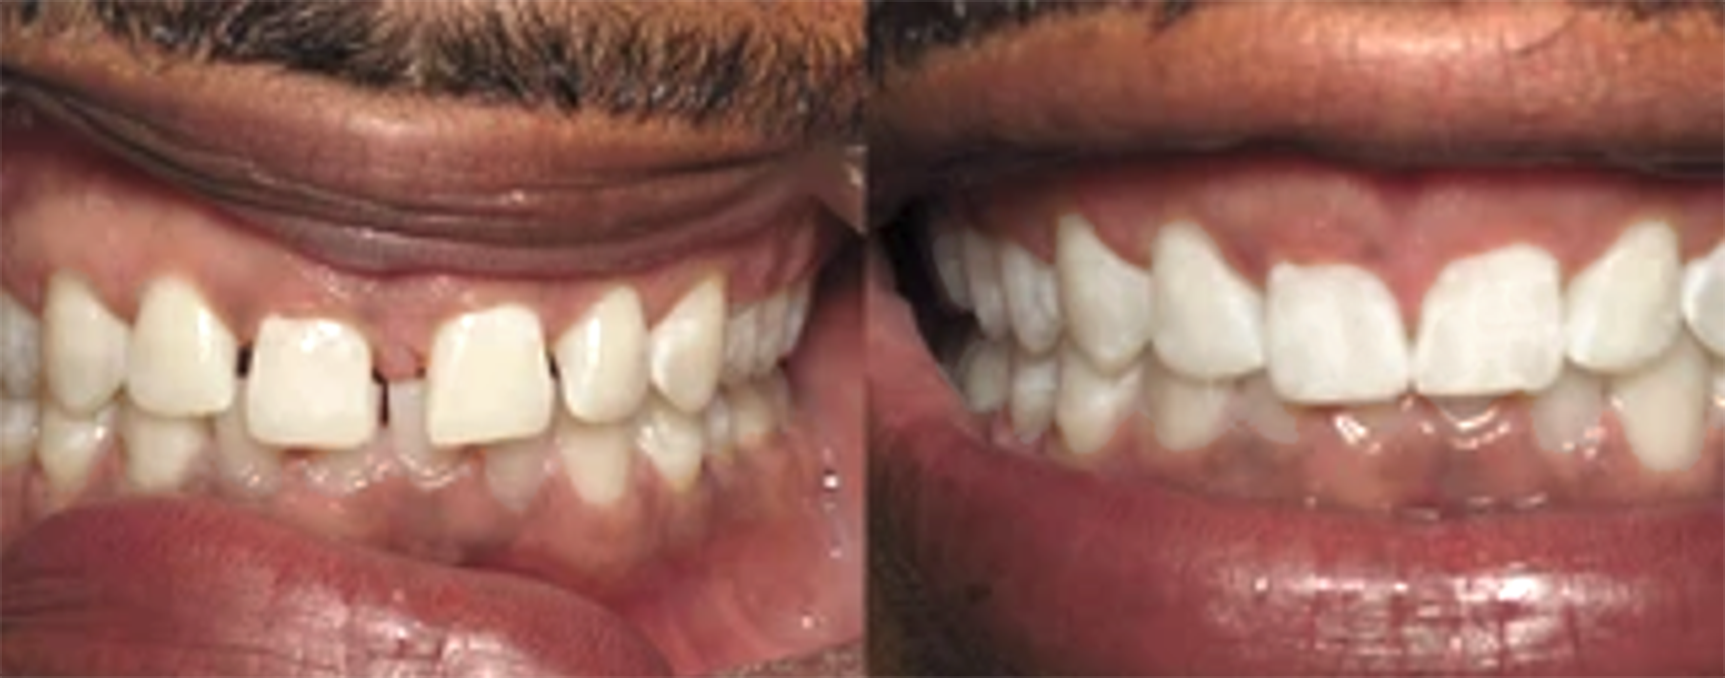 teeth alignment results